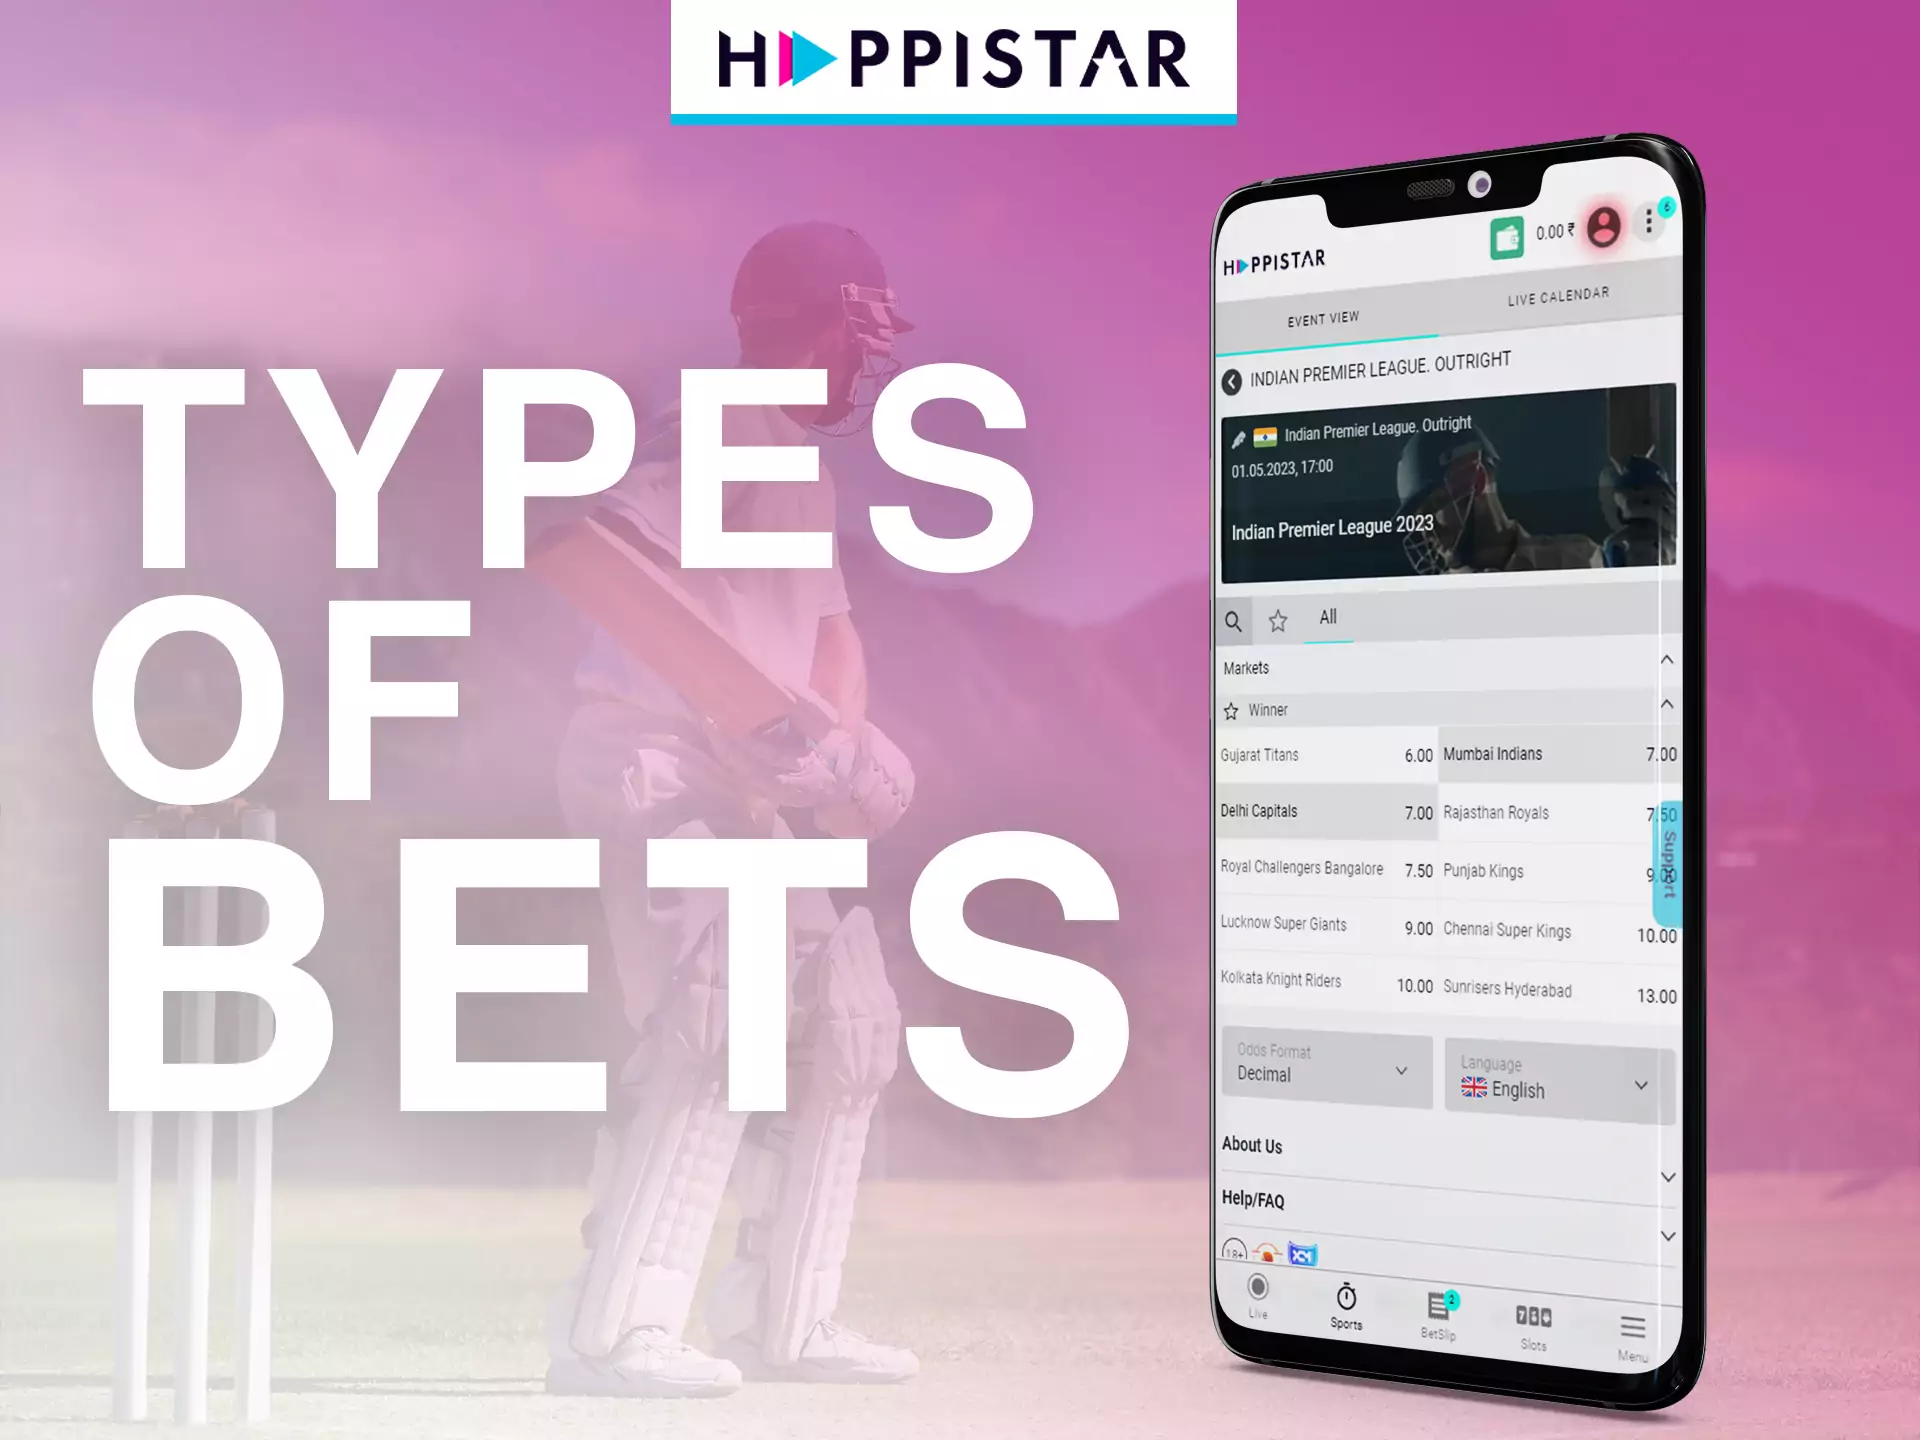 On Happistar different types of bets are available for bettors.